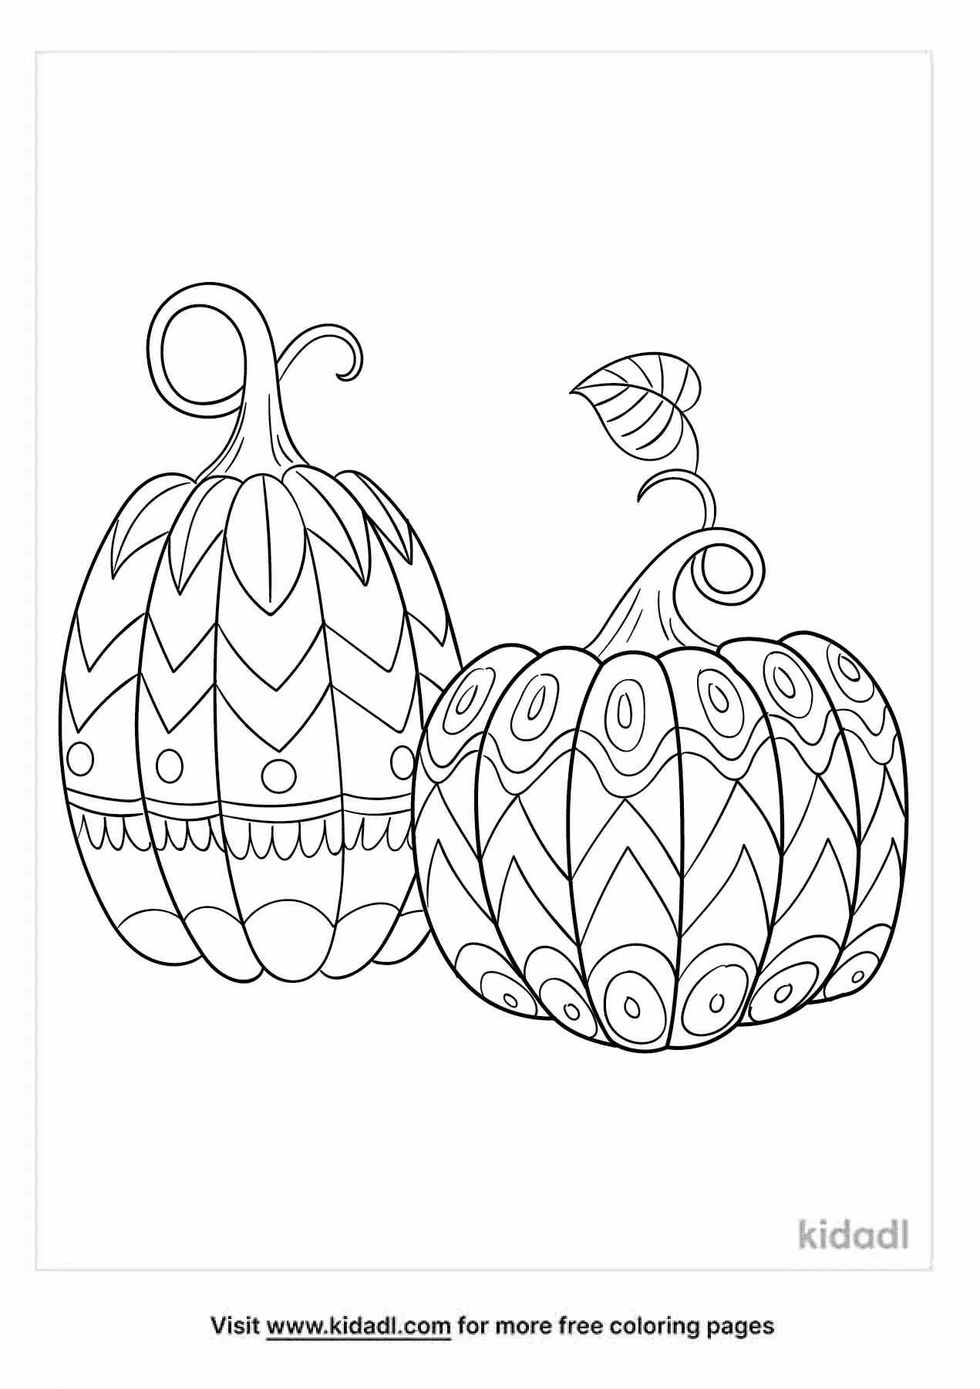 Cute pumpkins coloring pages for kids.